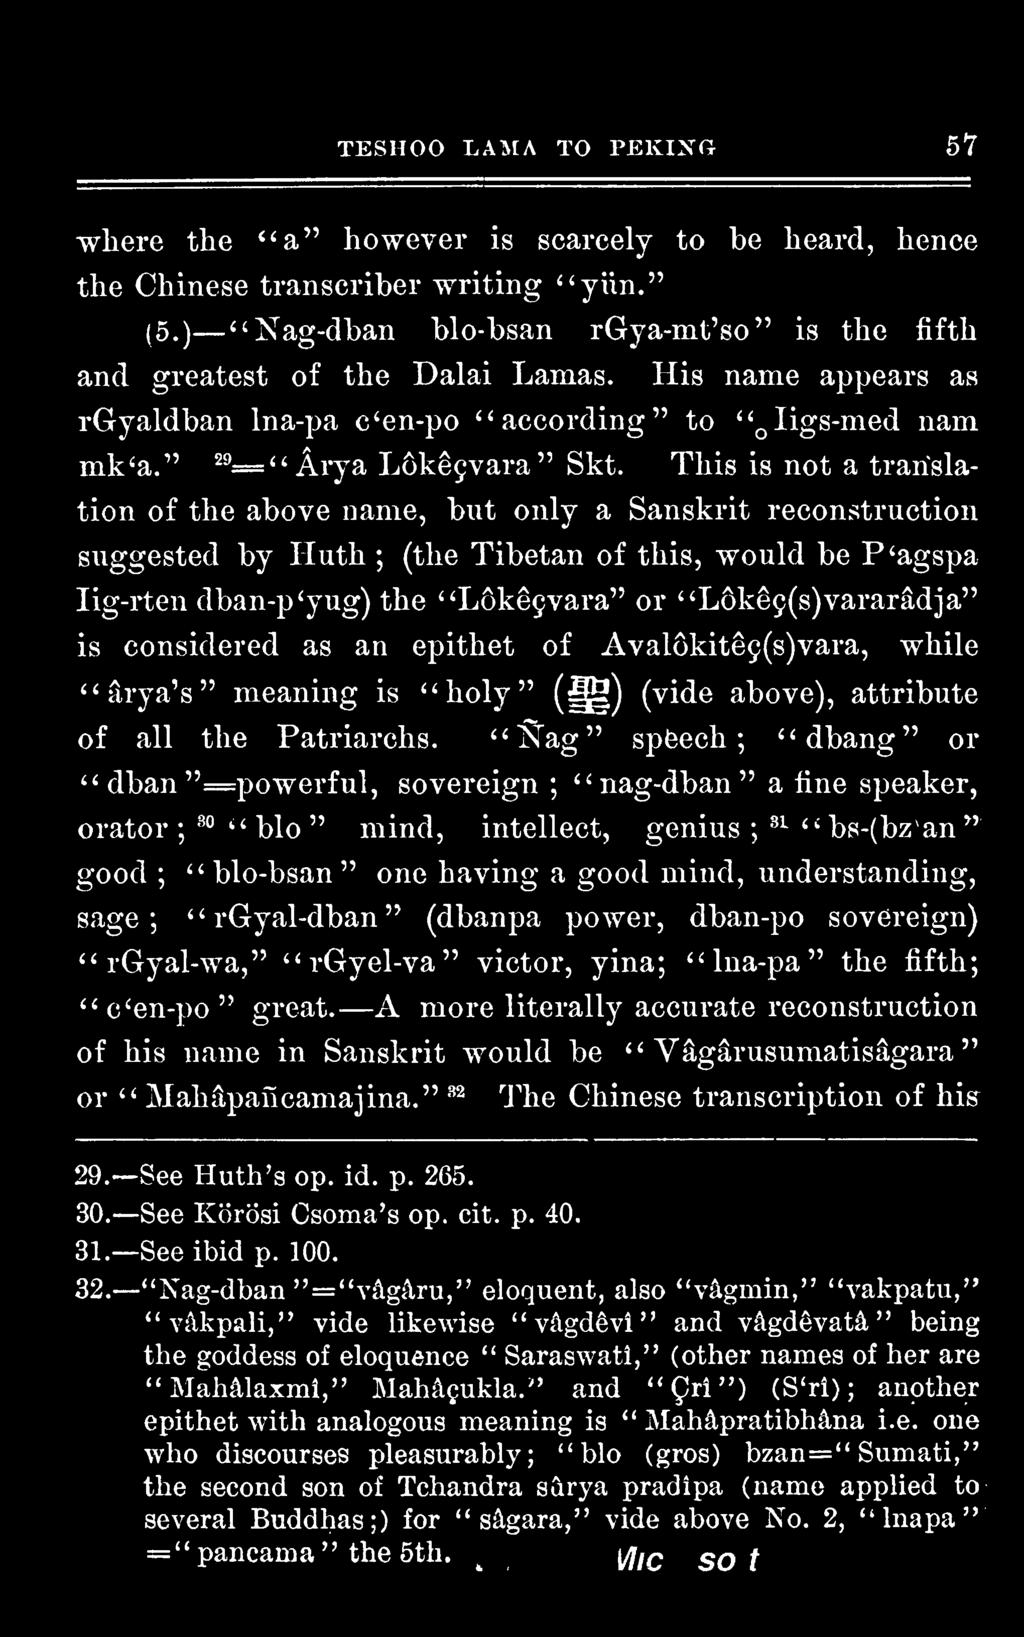 This is not a translation of the above name, but only a Sanskrit reconstruction suggested by Iiuth ; (the Tibetan of this, would be P'agspa Iig-rten dban-p'yug) the "Lokecvara" or "L6kec(s)vararadja"